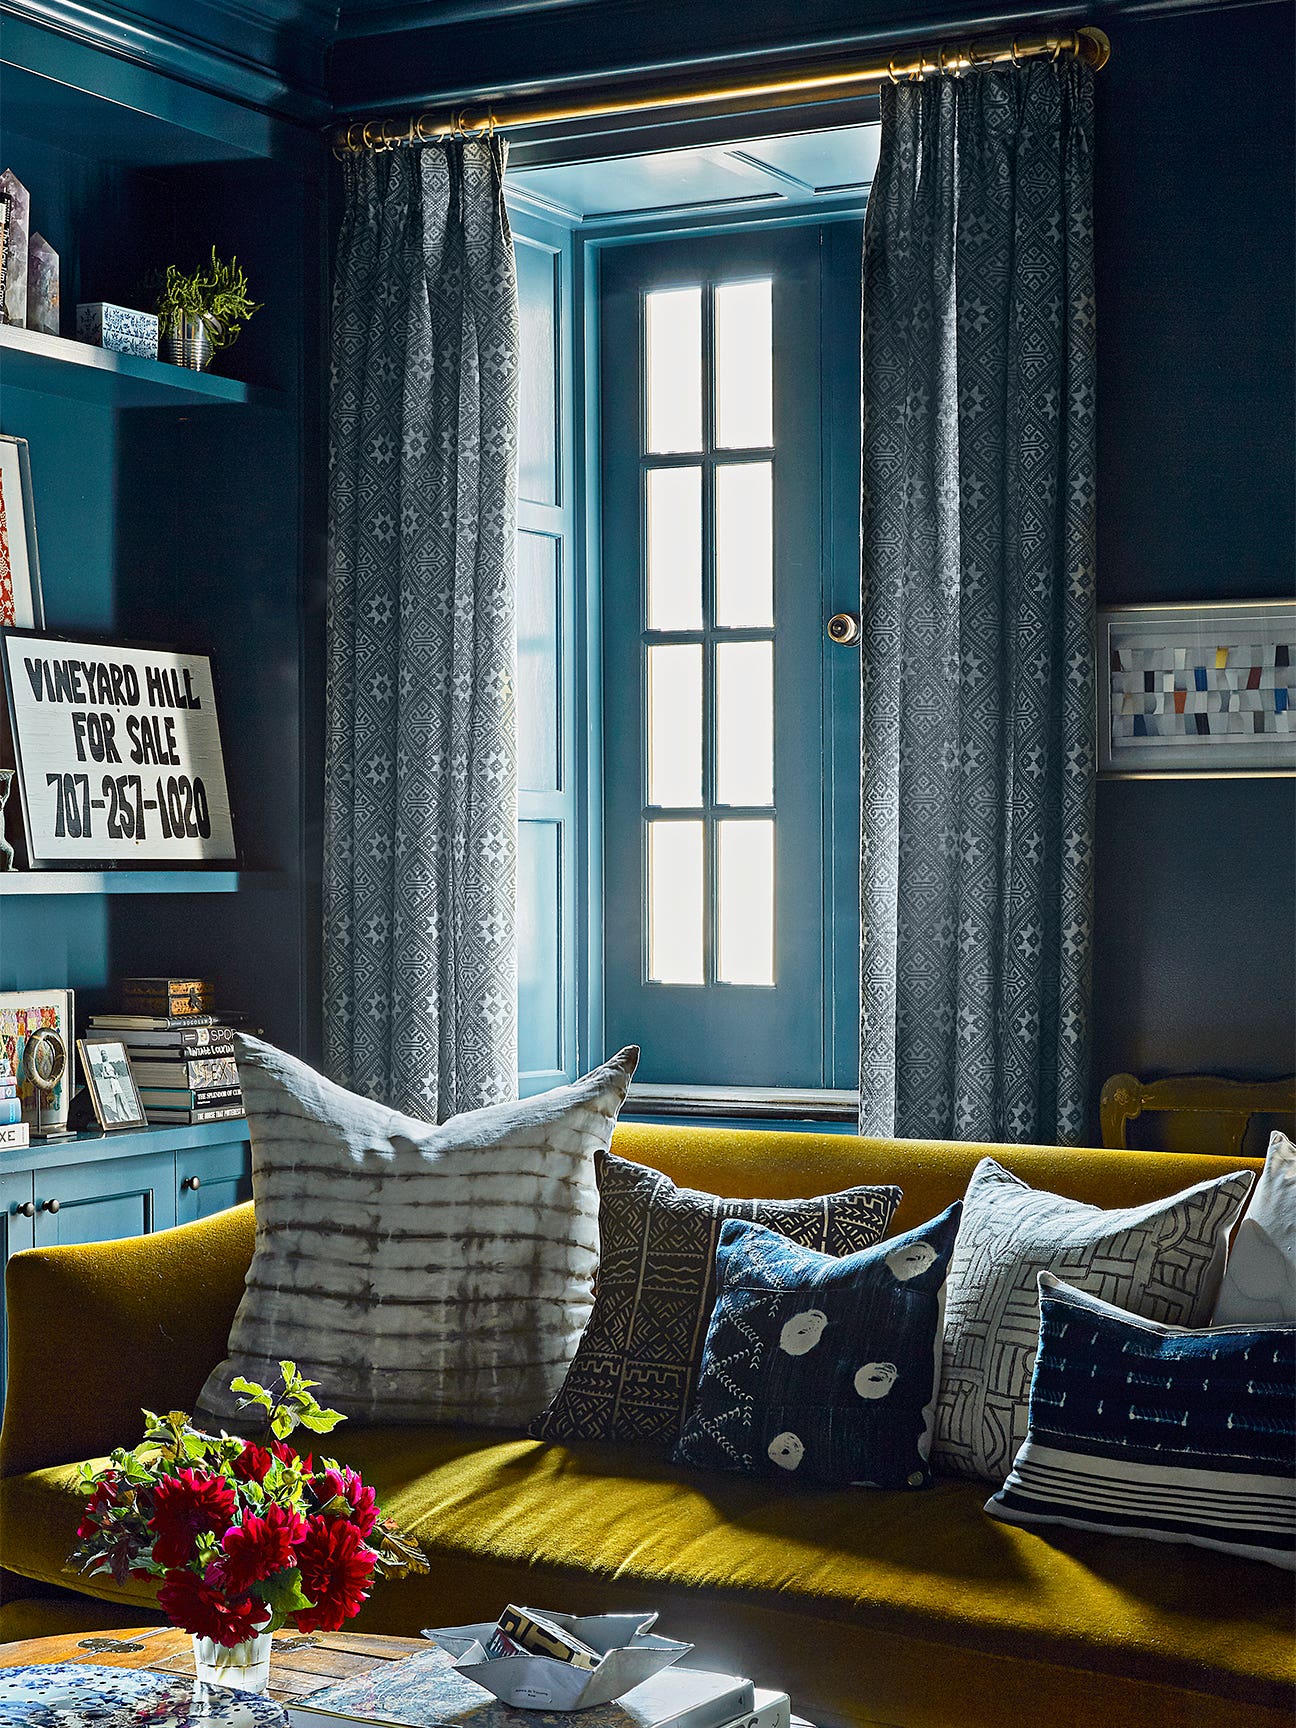 The One Thing Most People Overlook When Picking a Paint Color